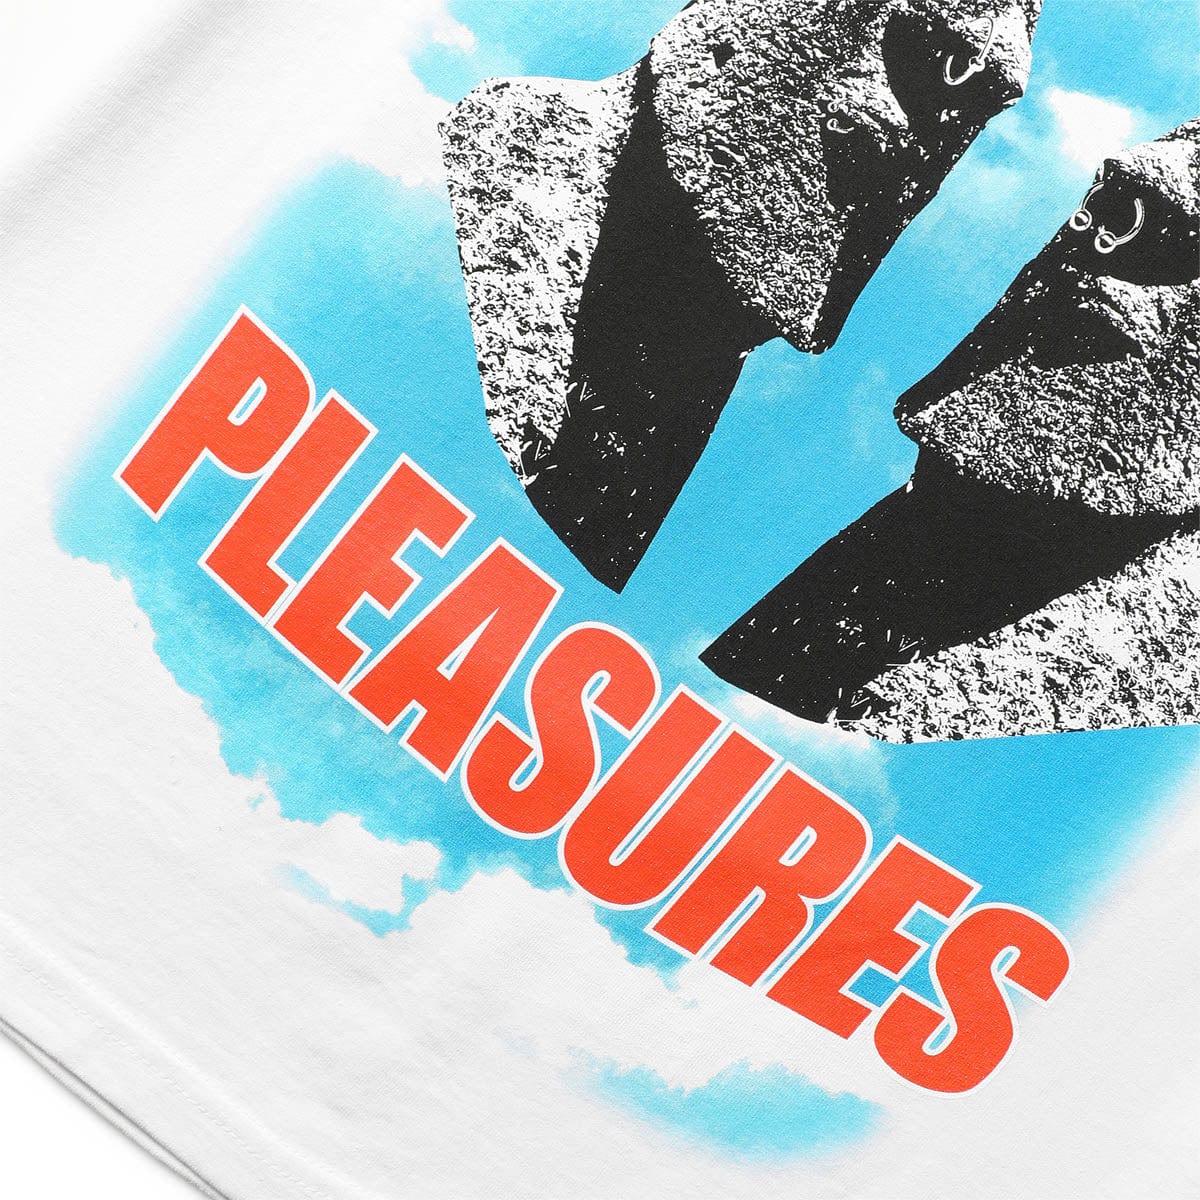 Pleasures T-Shirts OUT OF MY HEAD T-SHIRT